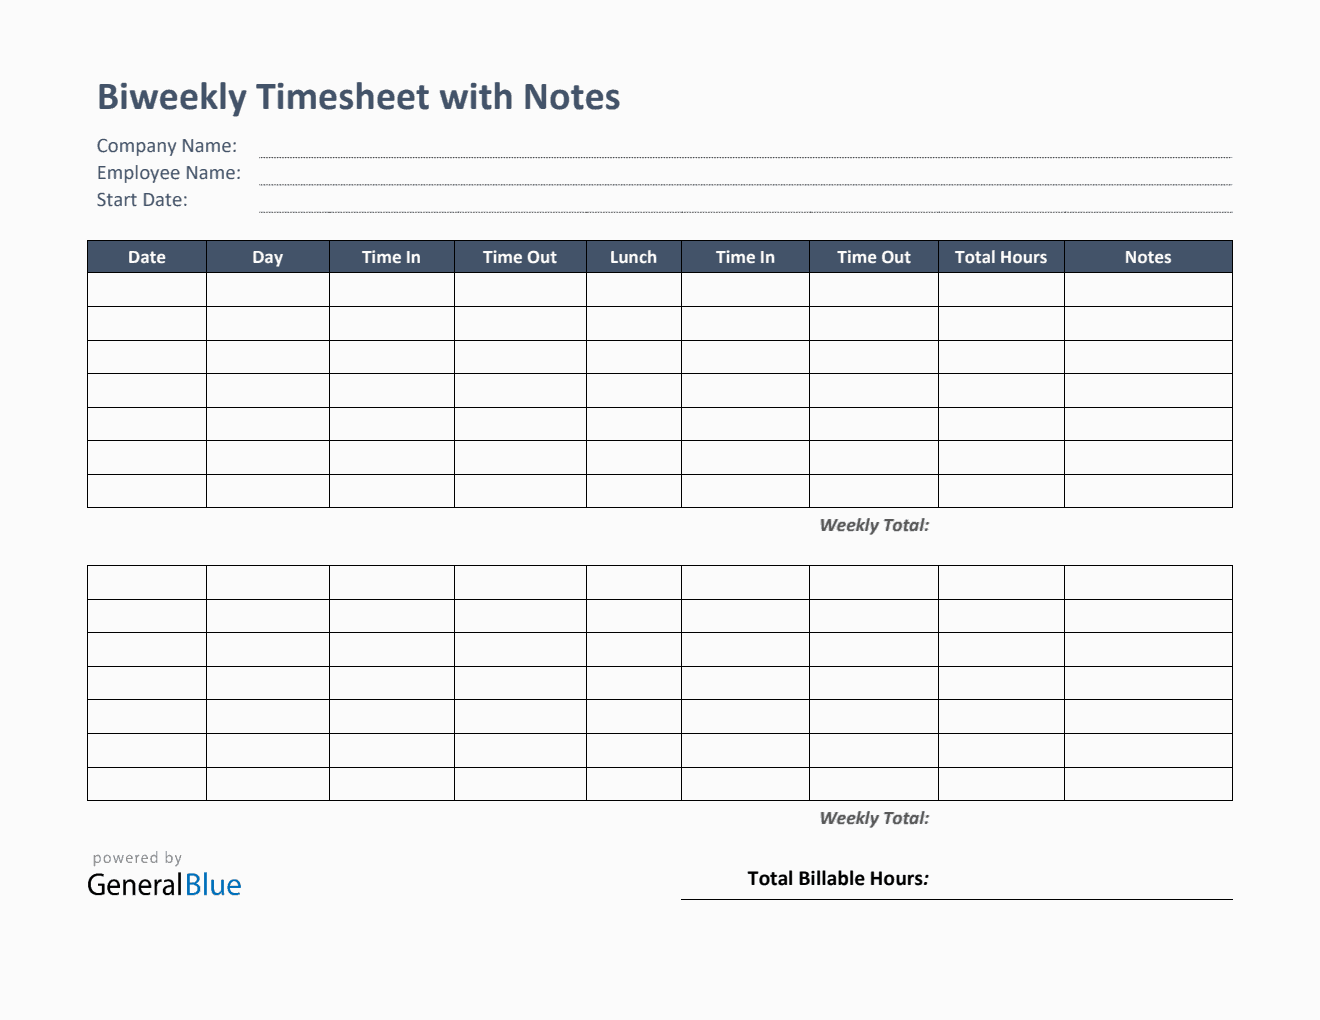 biweekly-timesheet-with-notes-in-pdf